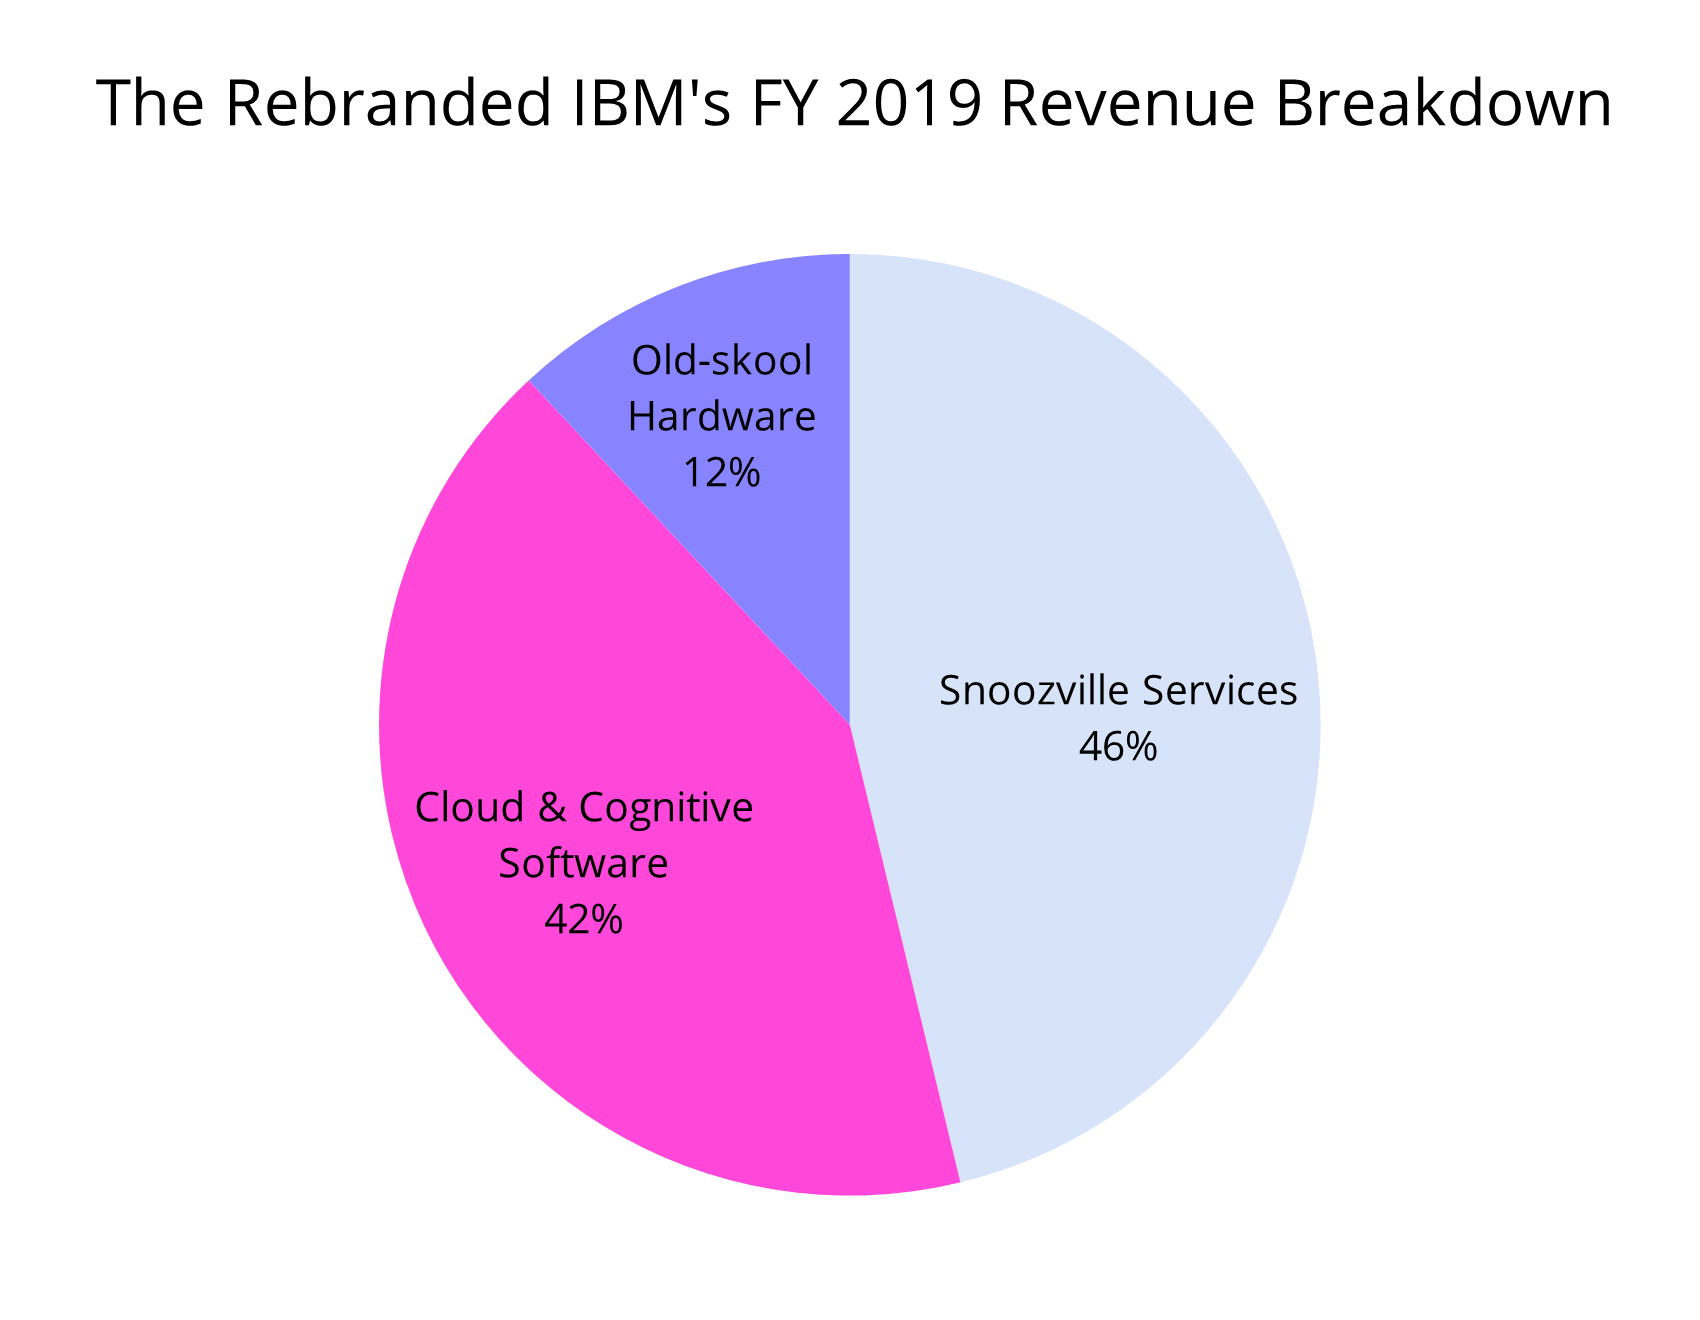 A pie chart showing the rebranded IBM’s FY 2019 revenue breakdown. 46% for Snoozville Services, 42% for Cloud and Cognitive, 12% for Old-skool Hardware.